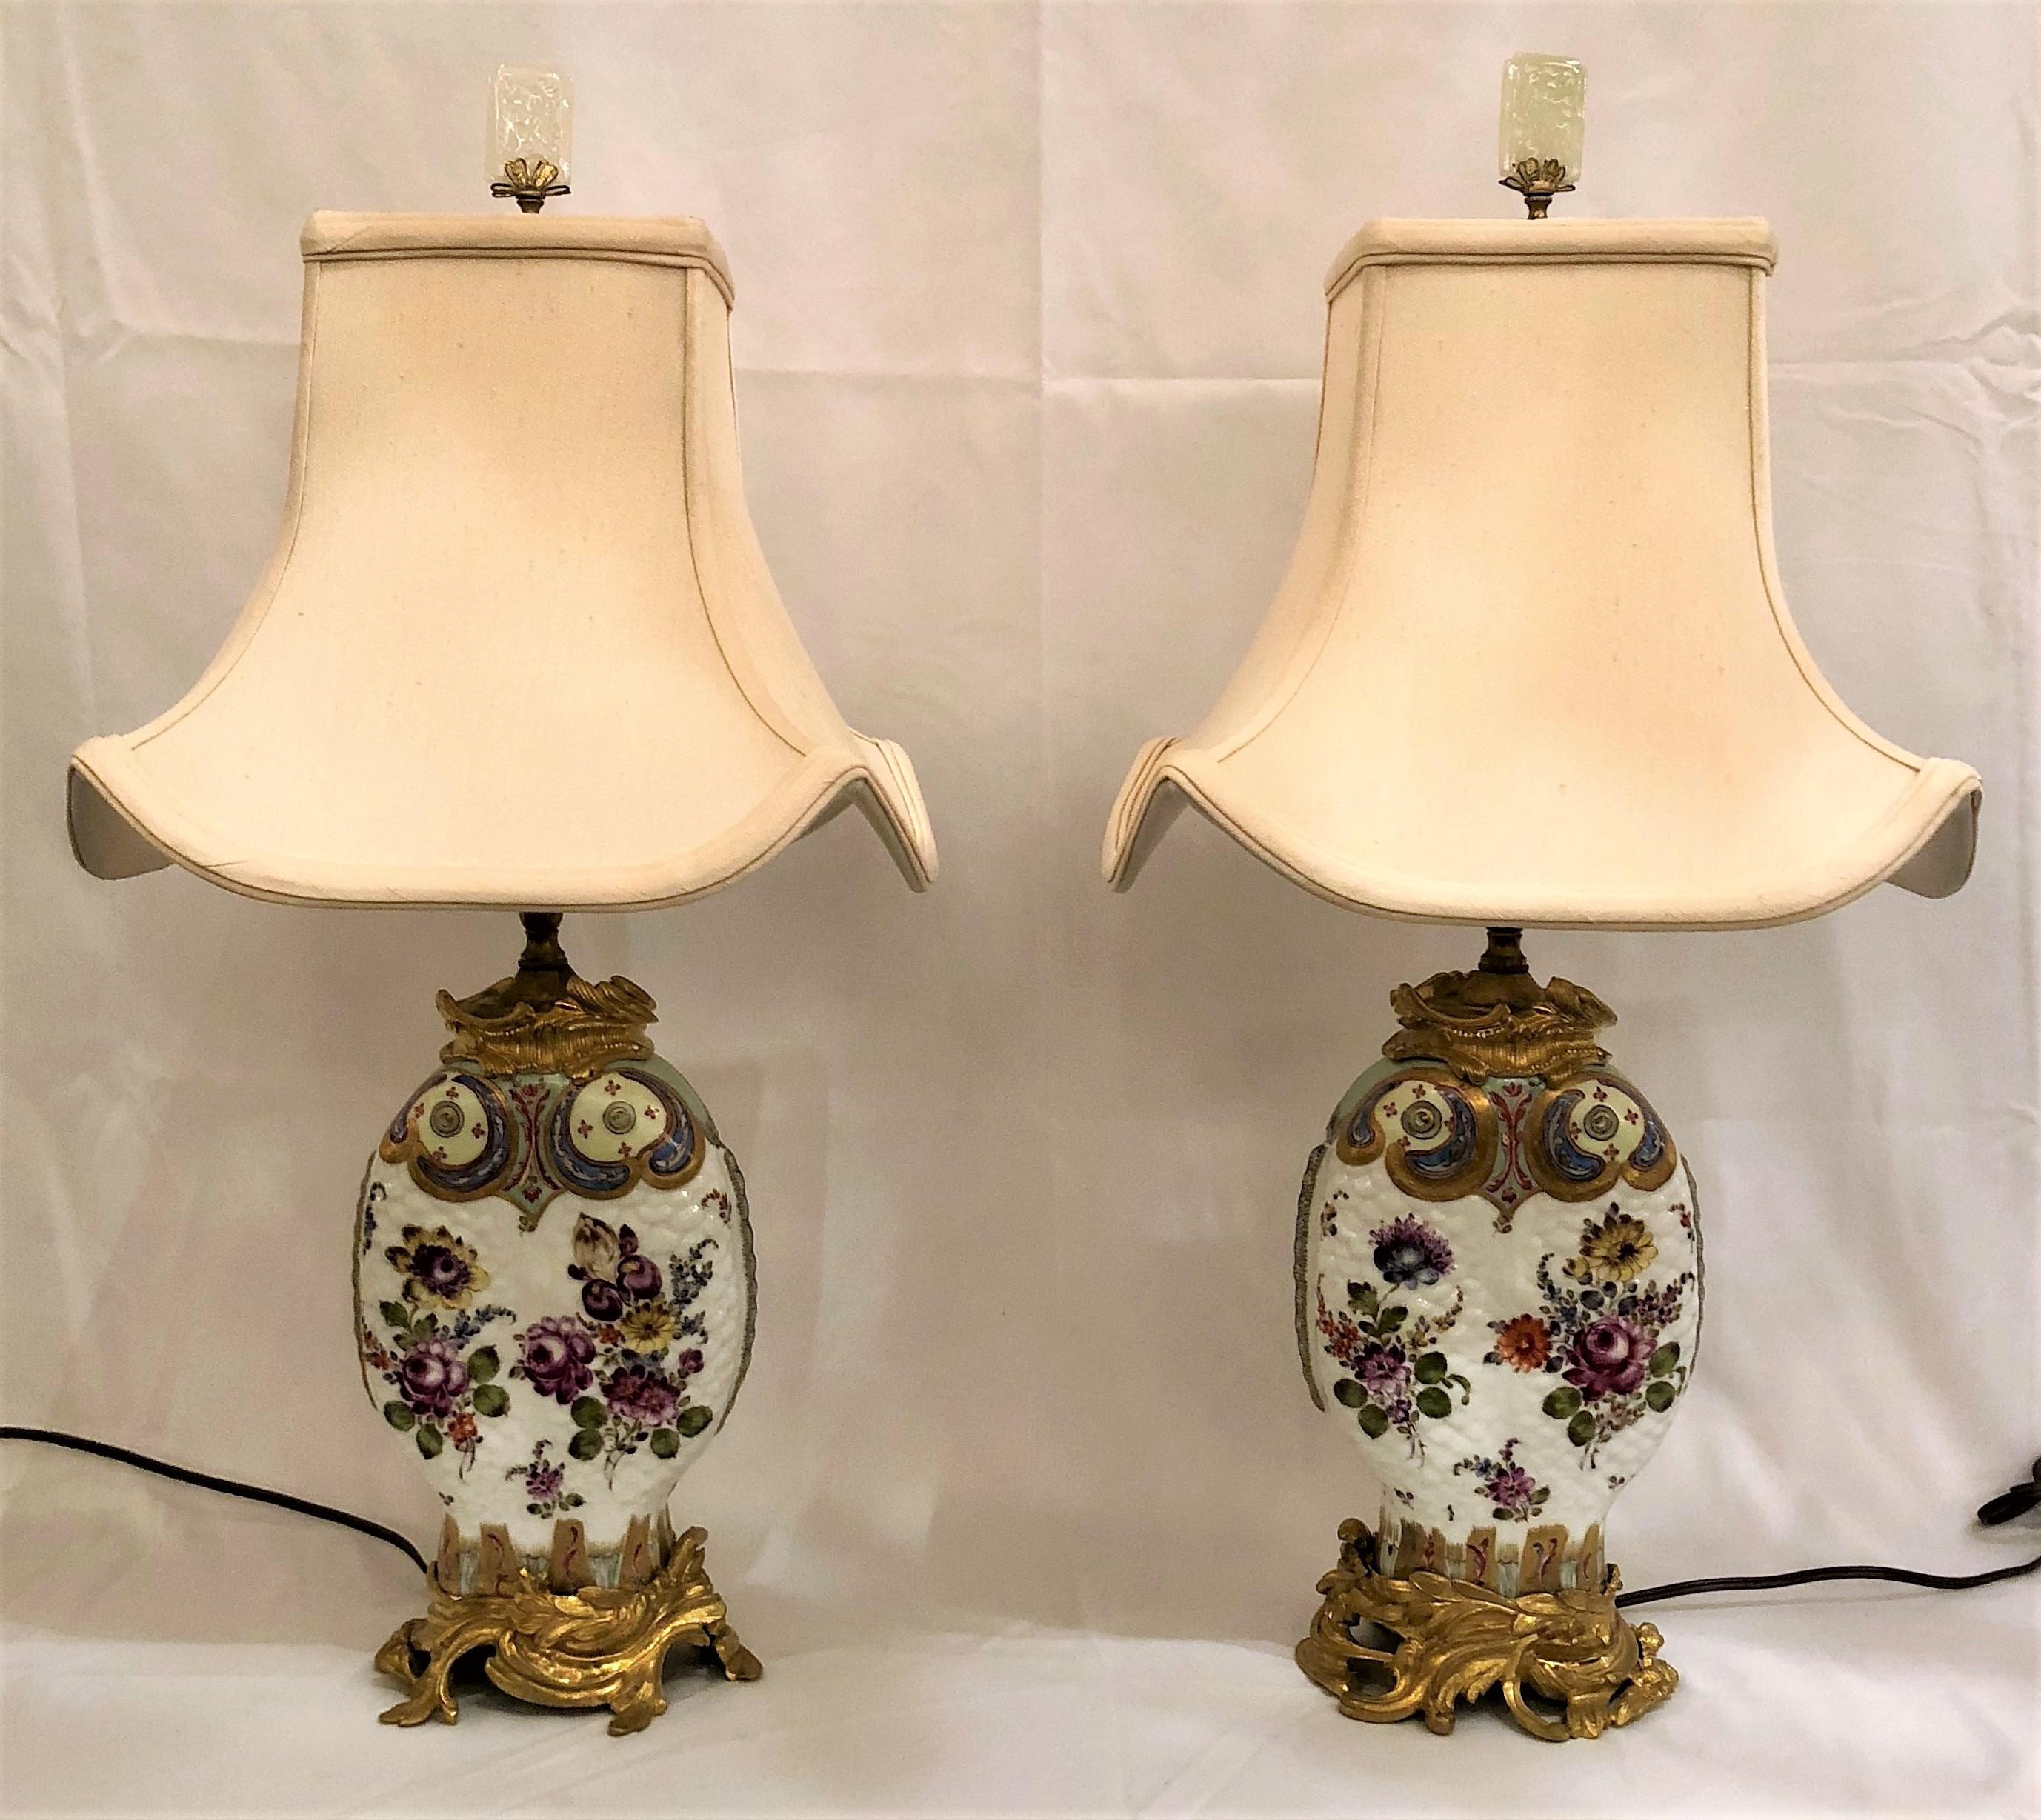 Pair of Antique Chinoiserie Porcelain Lamps with Ormolu Mounts In Good Condition For Sale In New Orleans, LA